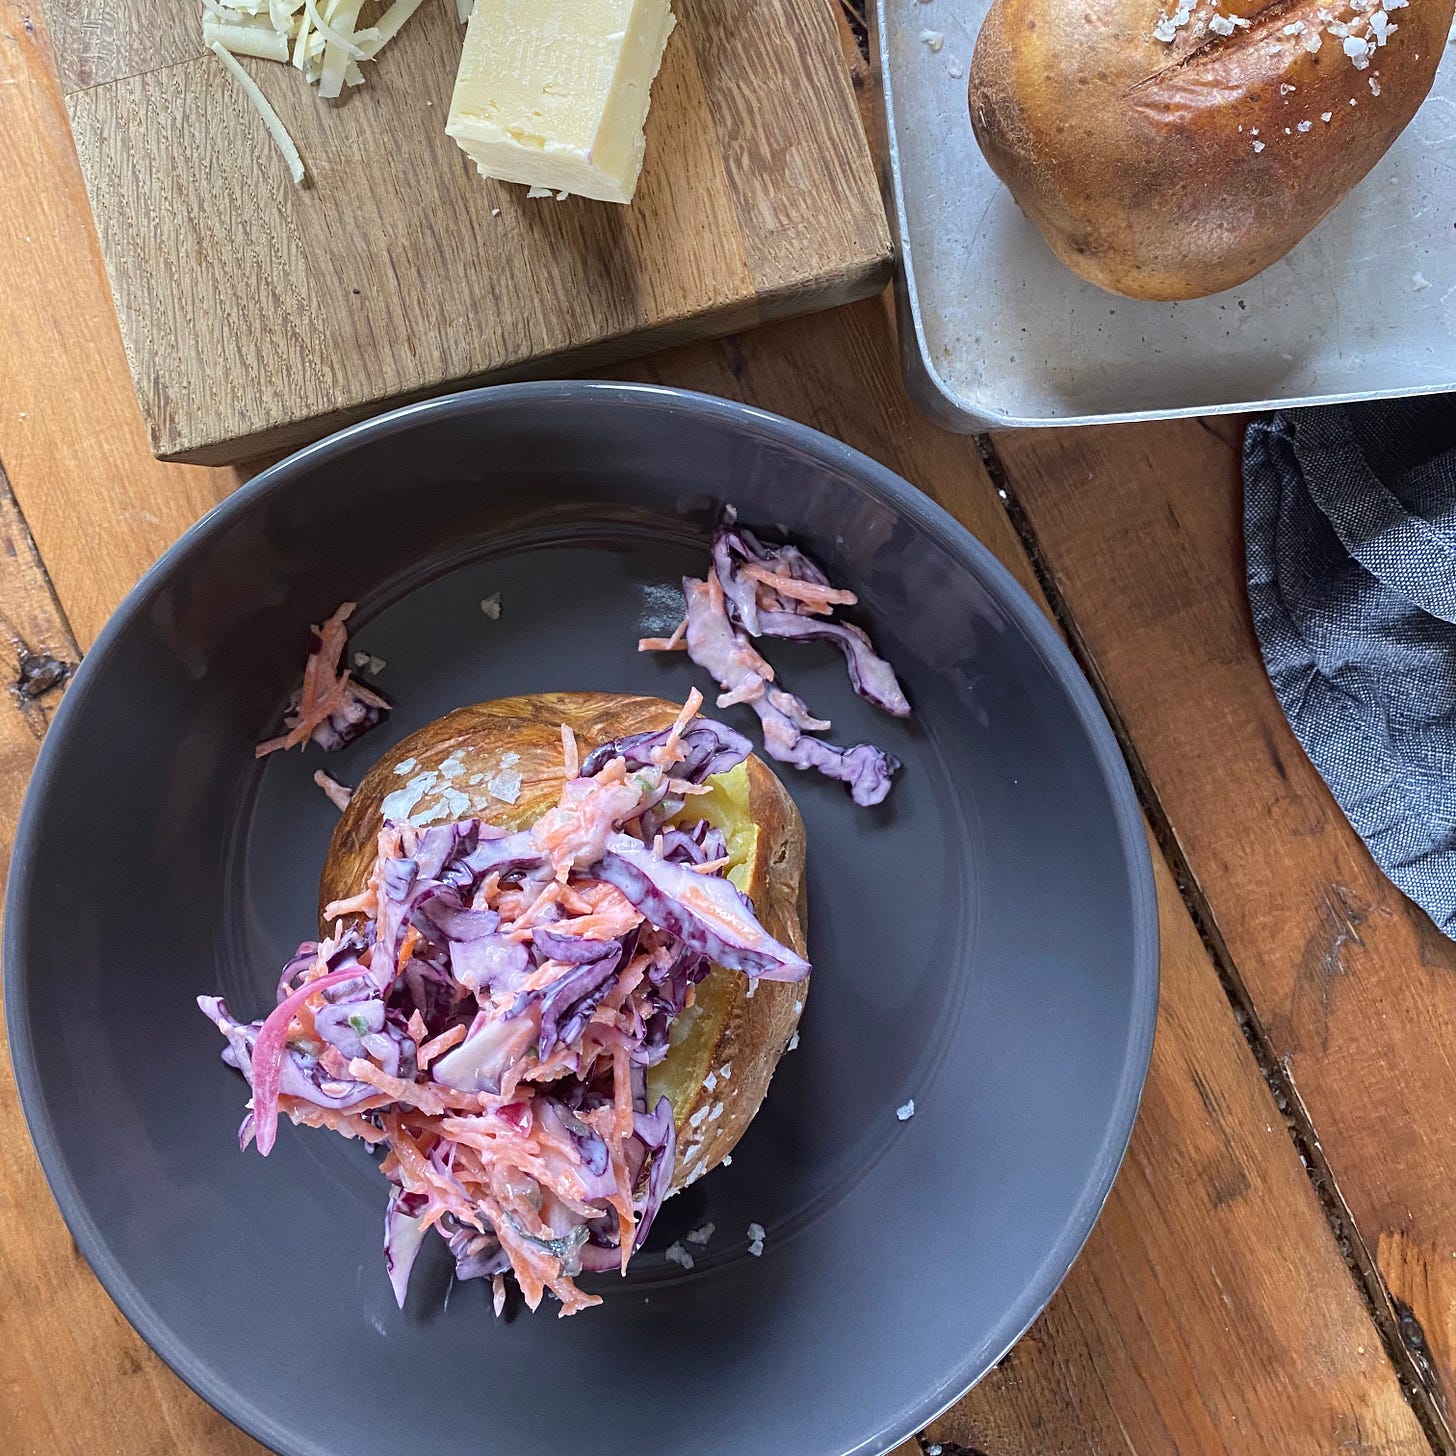 Jacket potato topped with cheese and coleslaw, another potato in a baking tray to the side. 